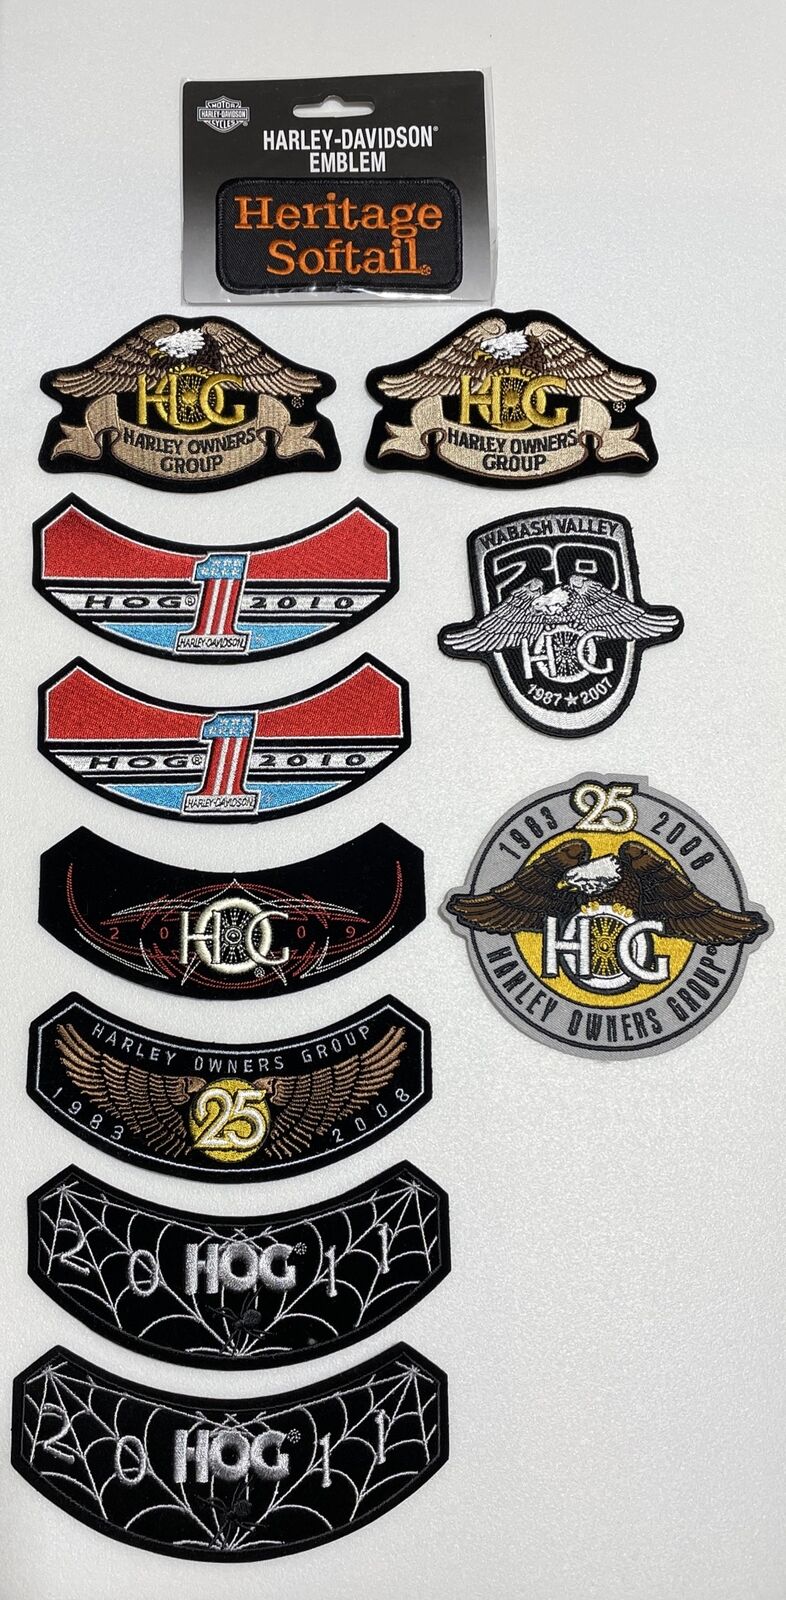 10 Harley Davidson Owners Group HOG Patches 2007-11 Plus Heritage Softail Patch